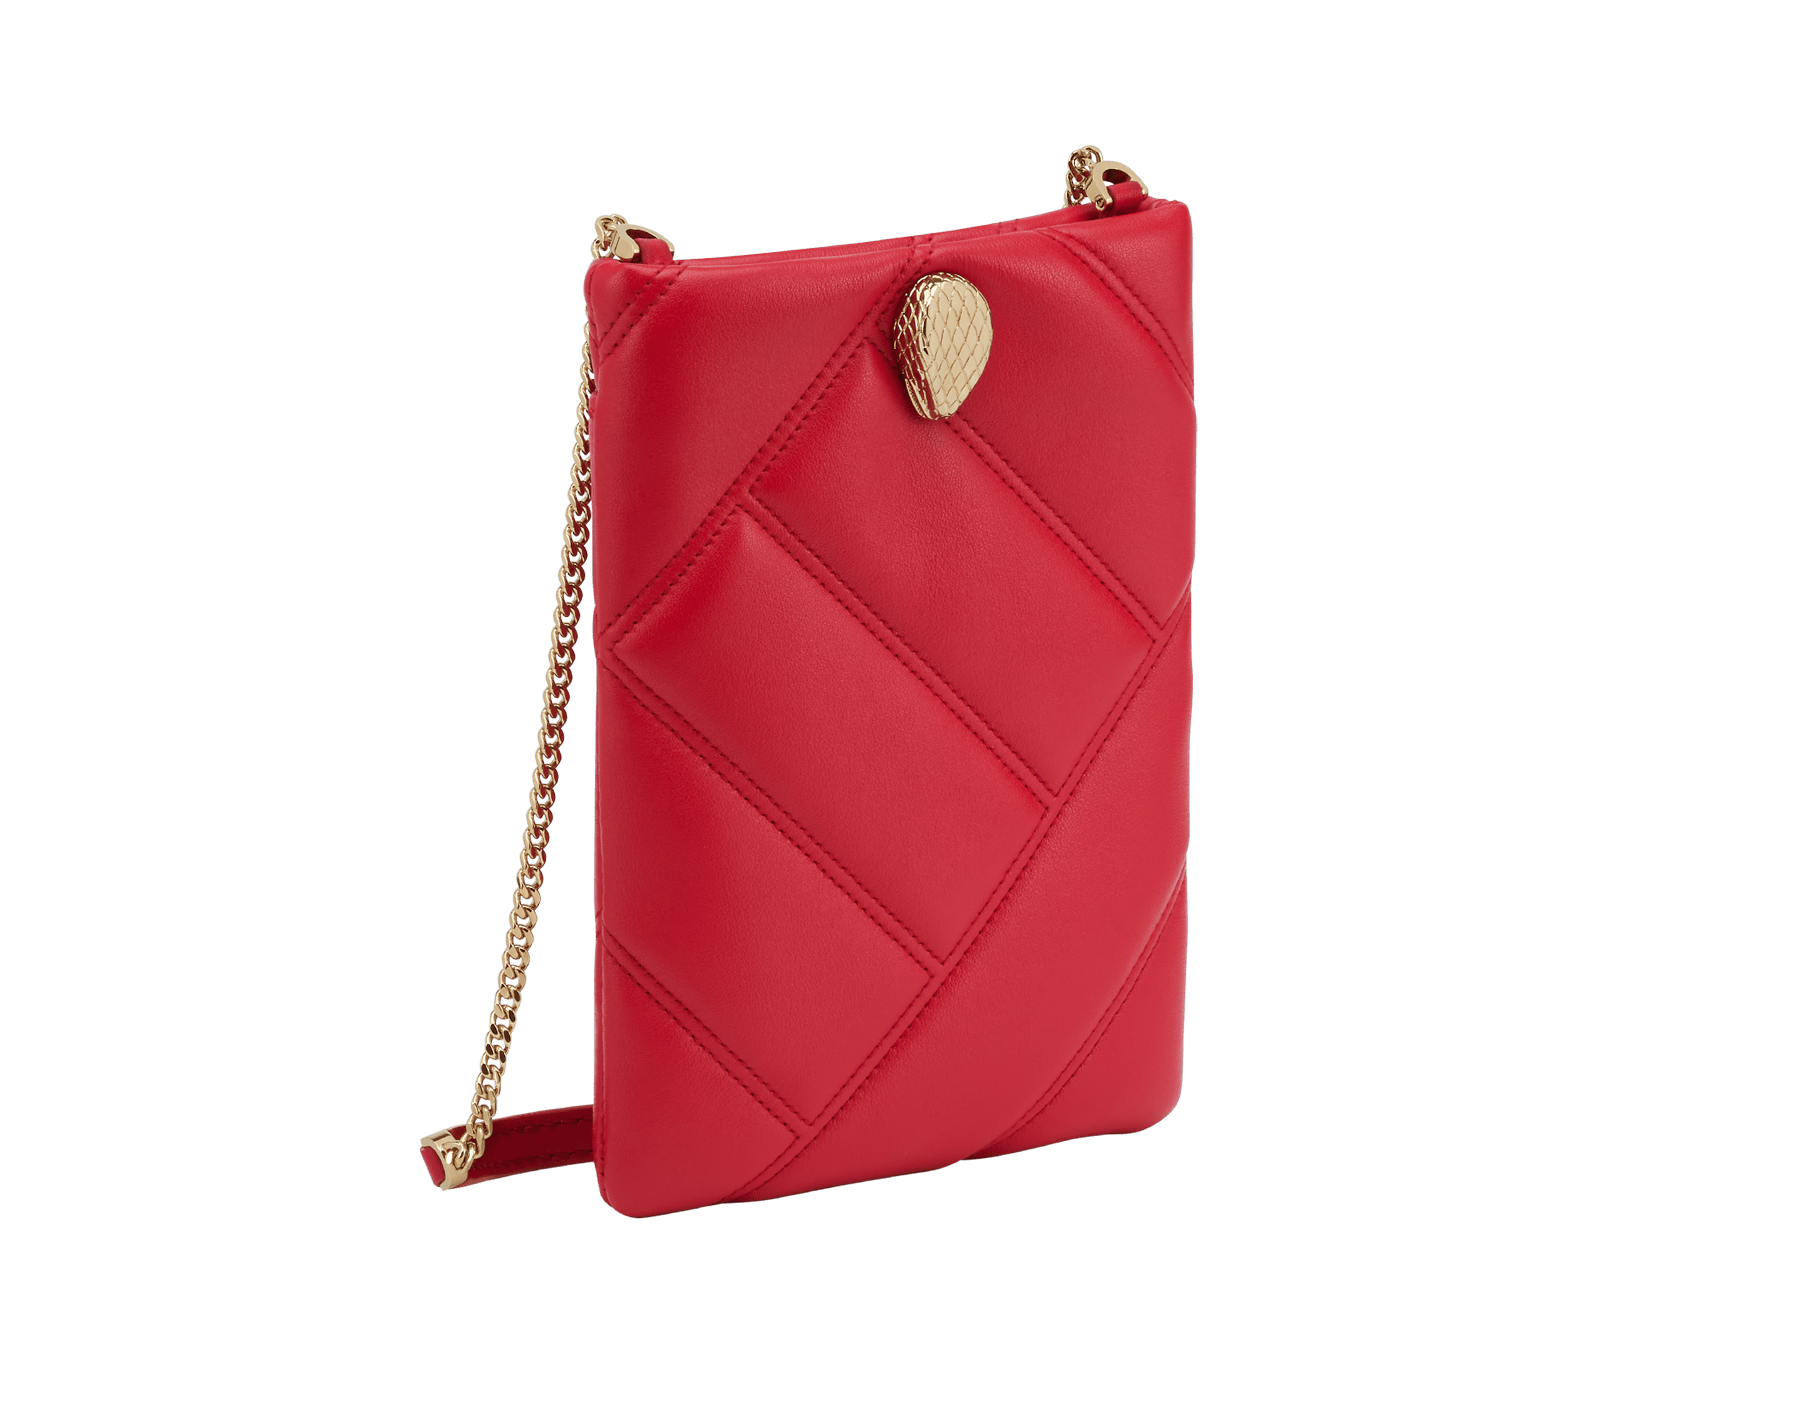 Serpenti Cabochon smart hybrid case in soft, black calf leather with maxi matelassé pattern and black nappa leather interior. Captivating, magnetic snakehead closure in gold-plated brass with red enamel eyes. SCB-HYBRID image 1